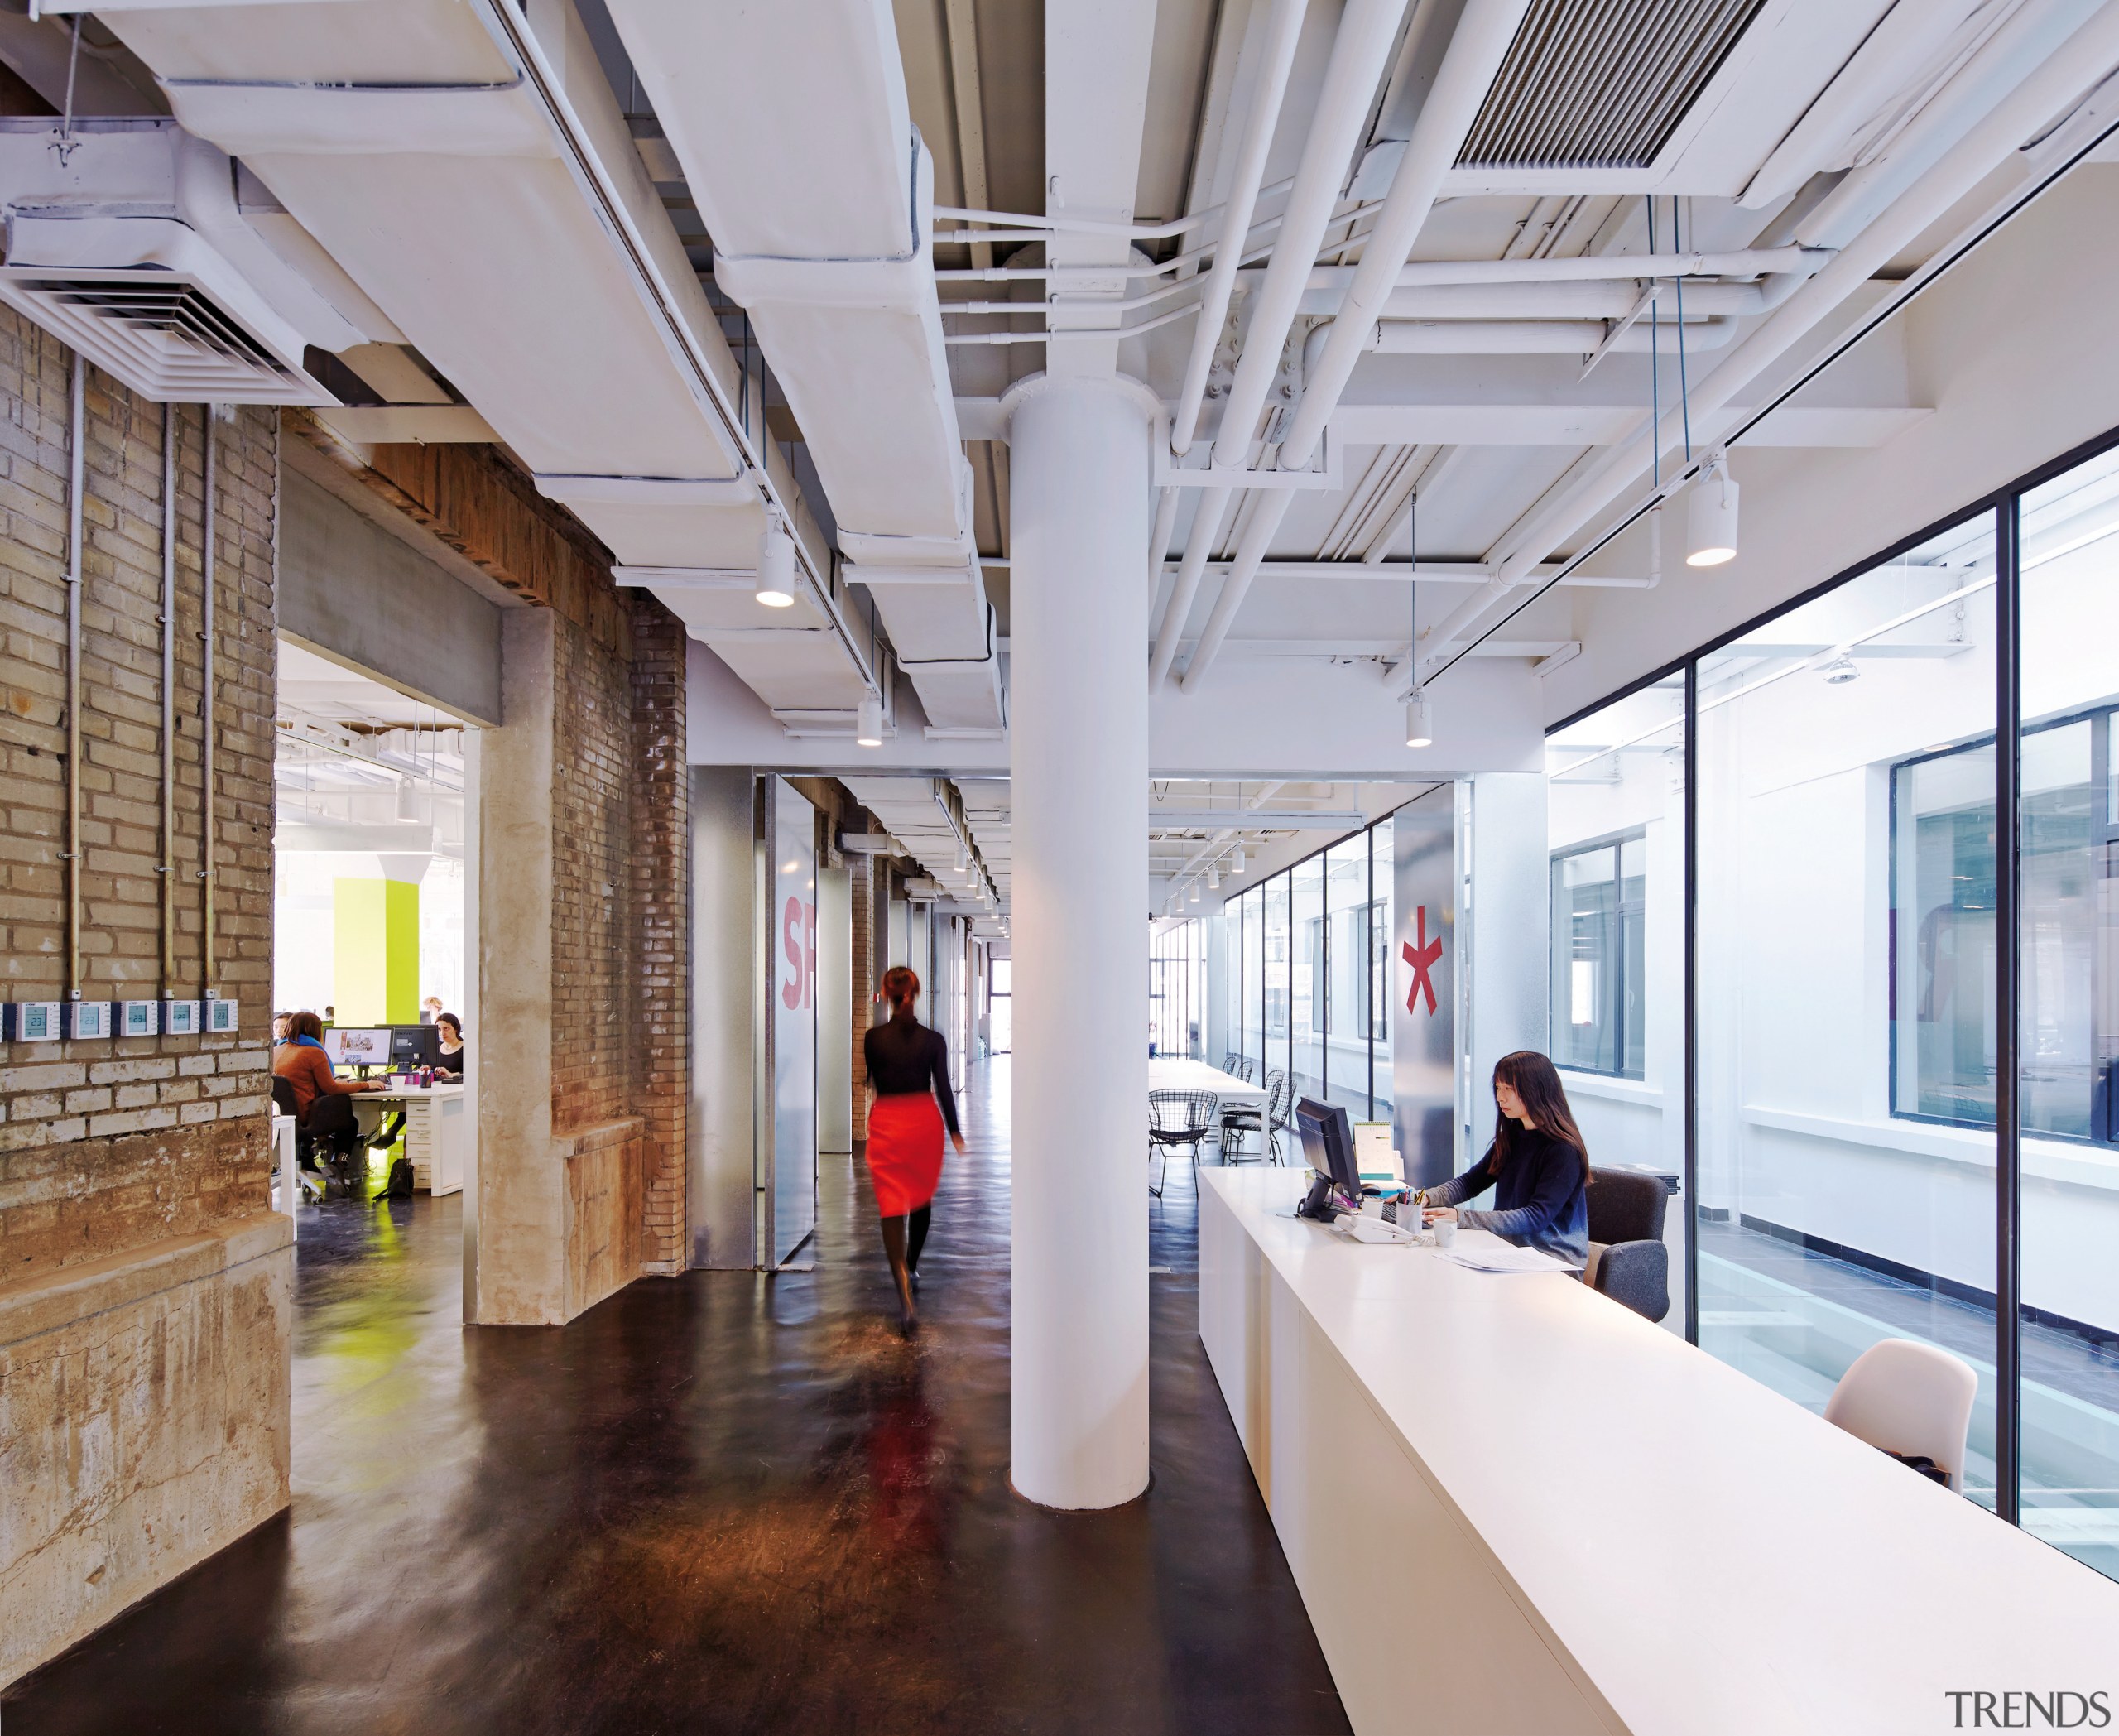 Exposed brick walls and service ducts provide an architecture, ceiling, interior design, lobby, gray